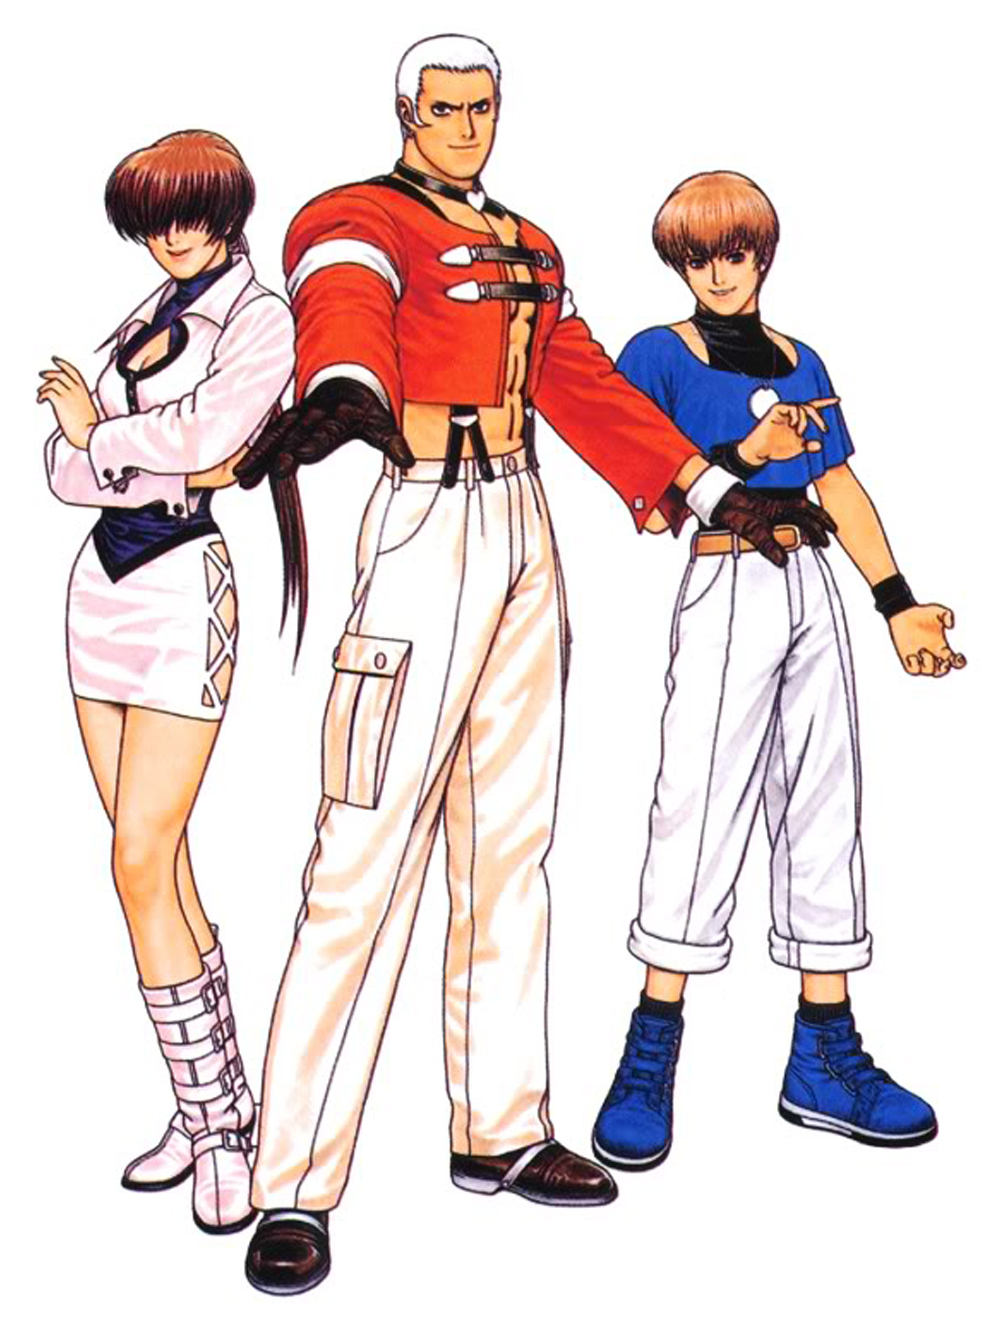 King Of Fighters 97 Women Fighters Team by hes6789 on DeviantArt